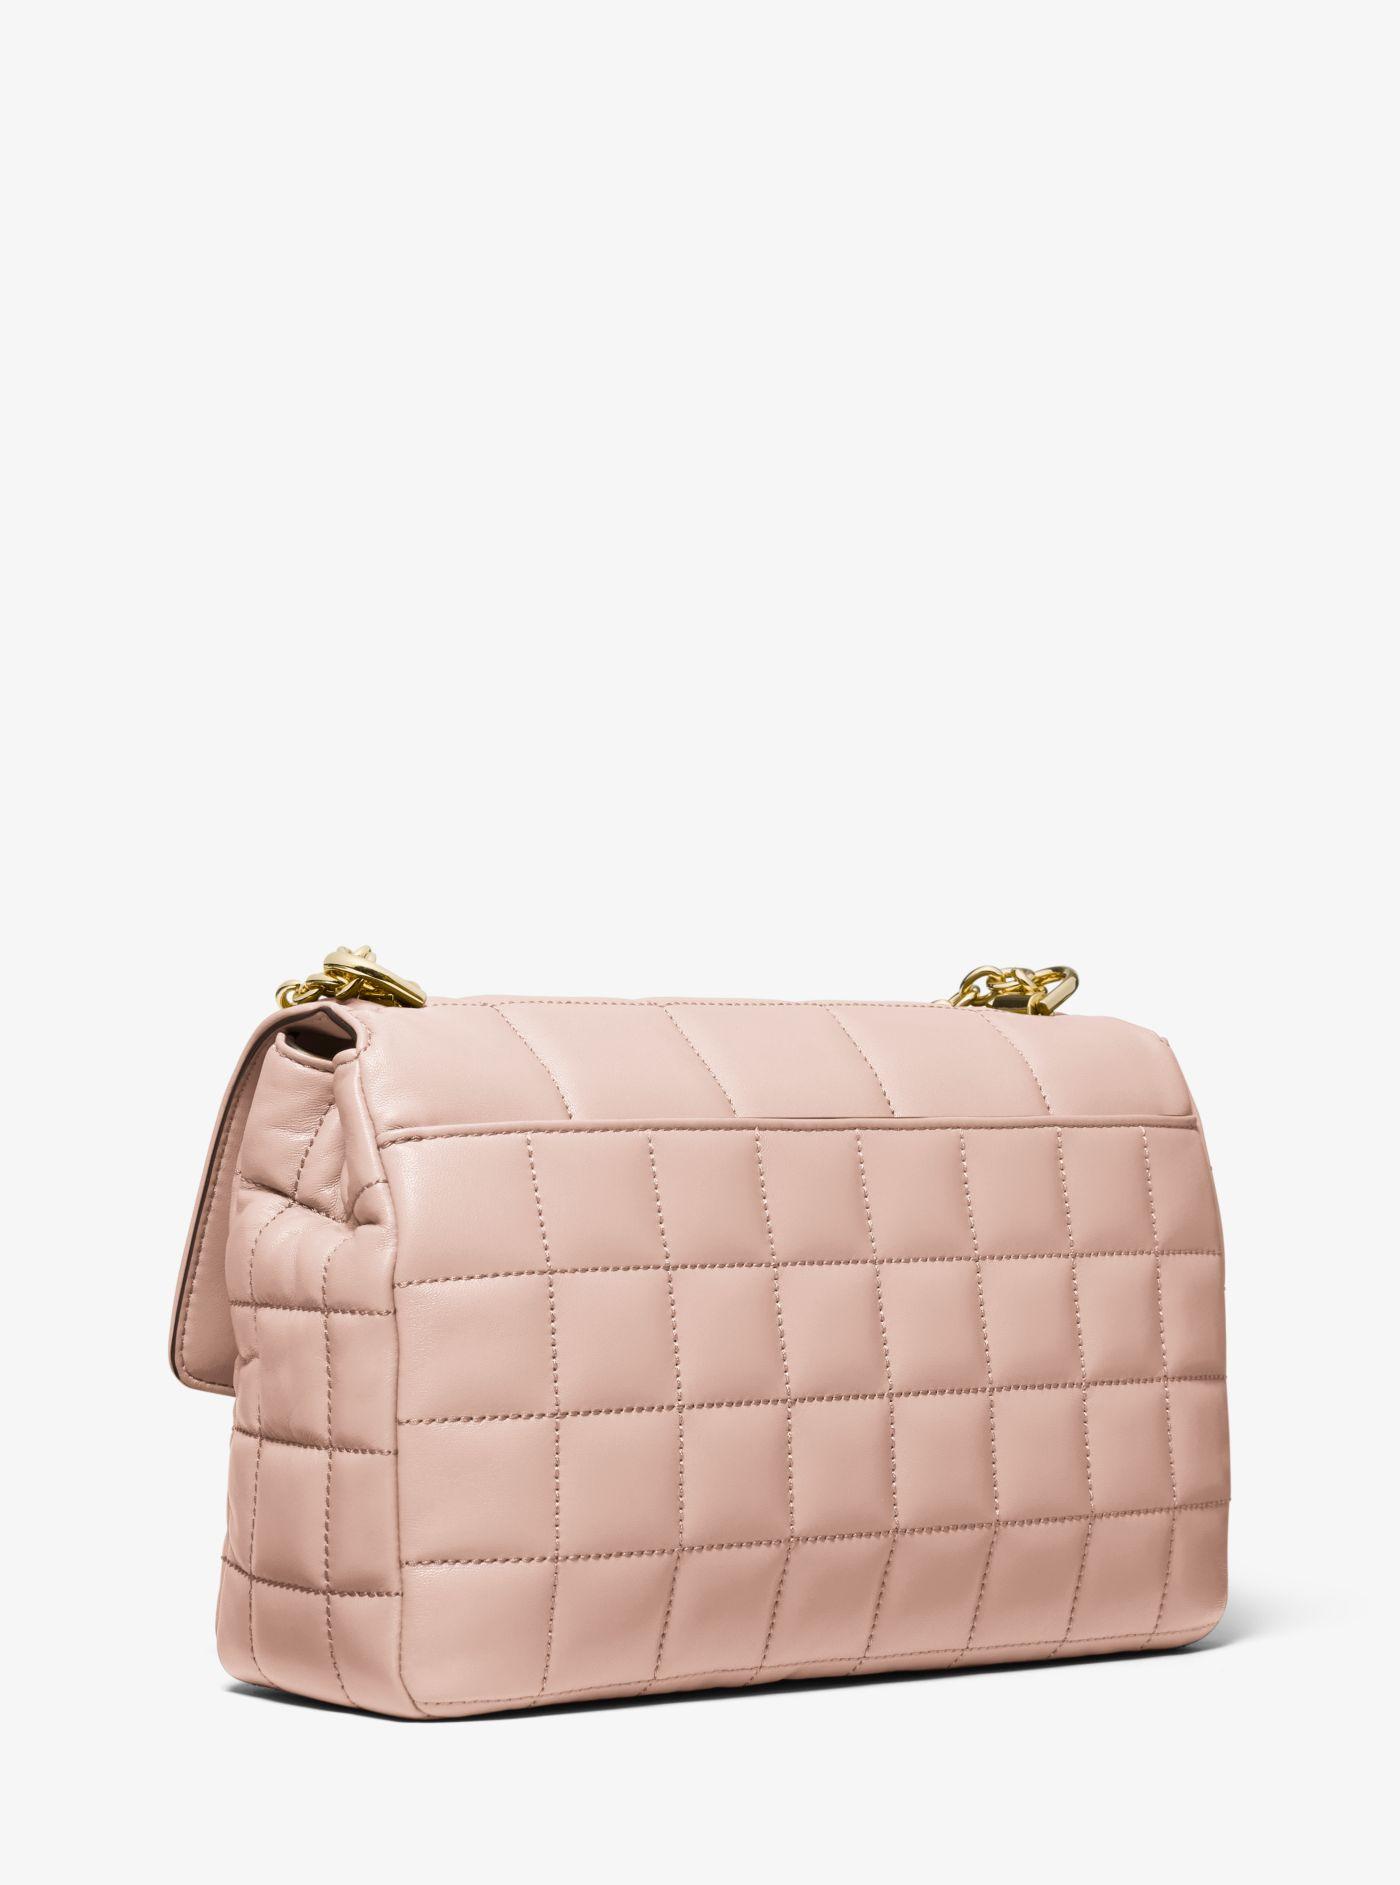 Michael Kors Soho Large Quilted Leather Shoulder Bag in Pink | Lyst